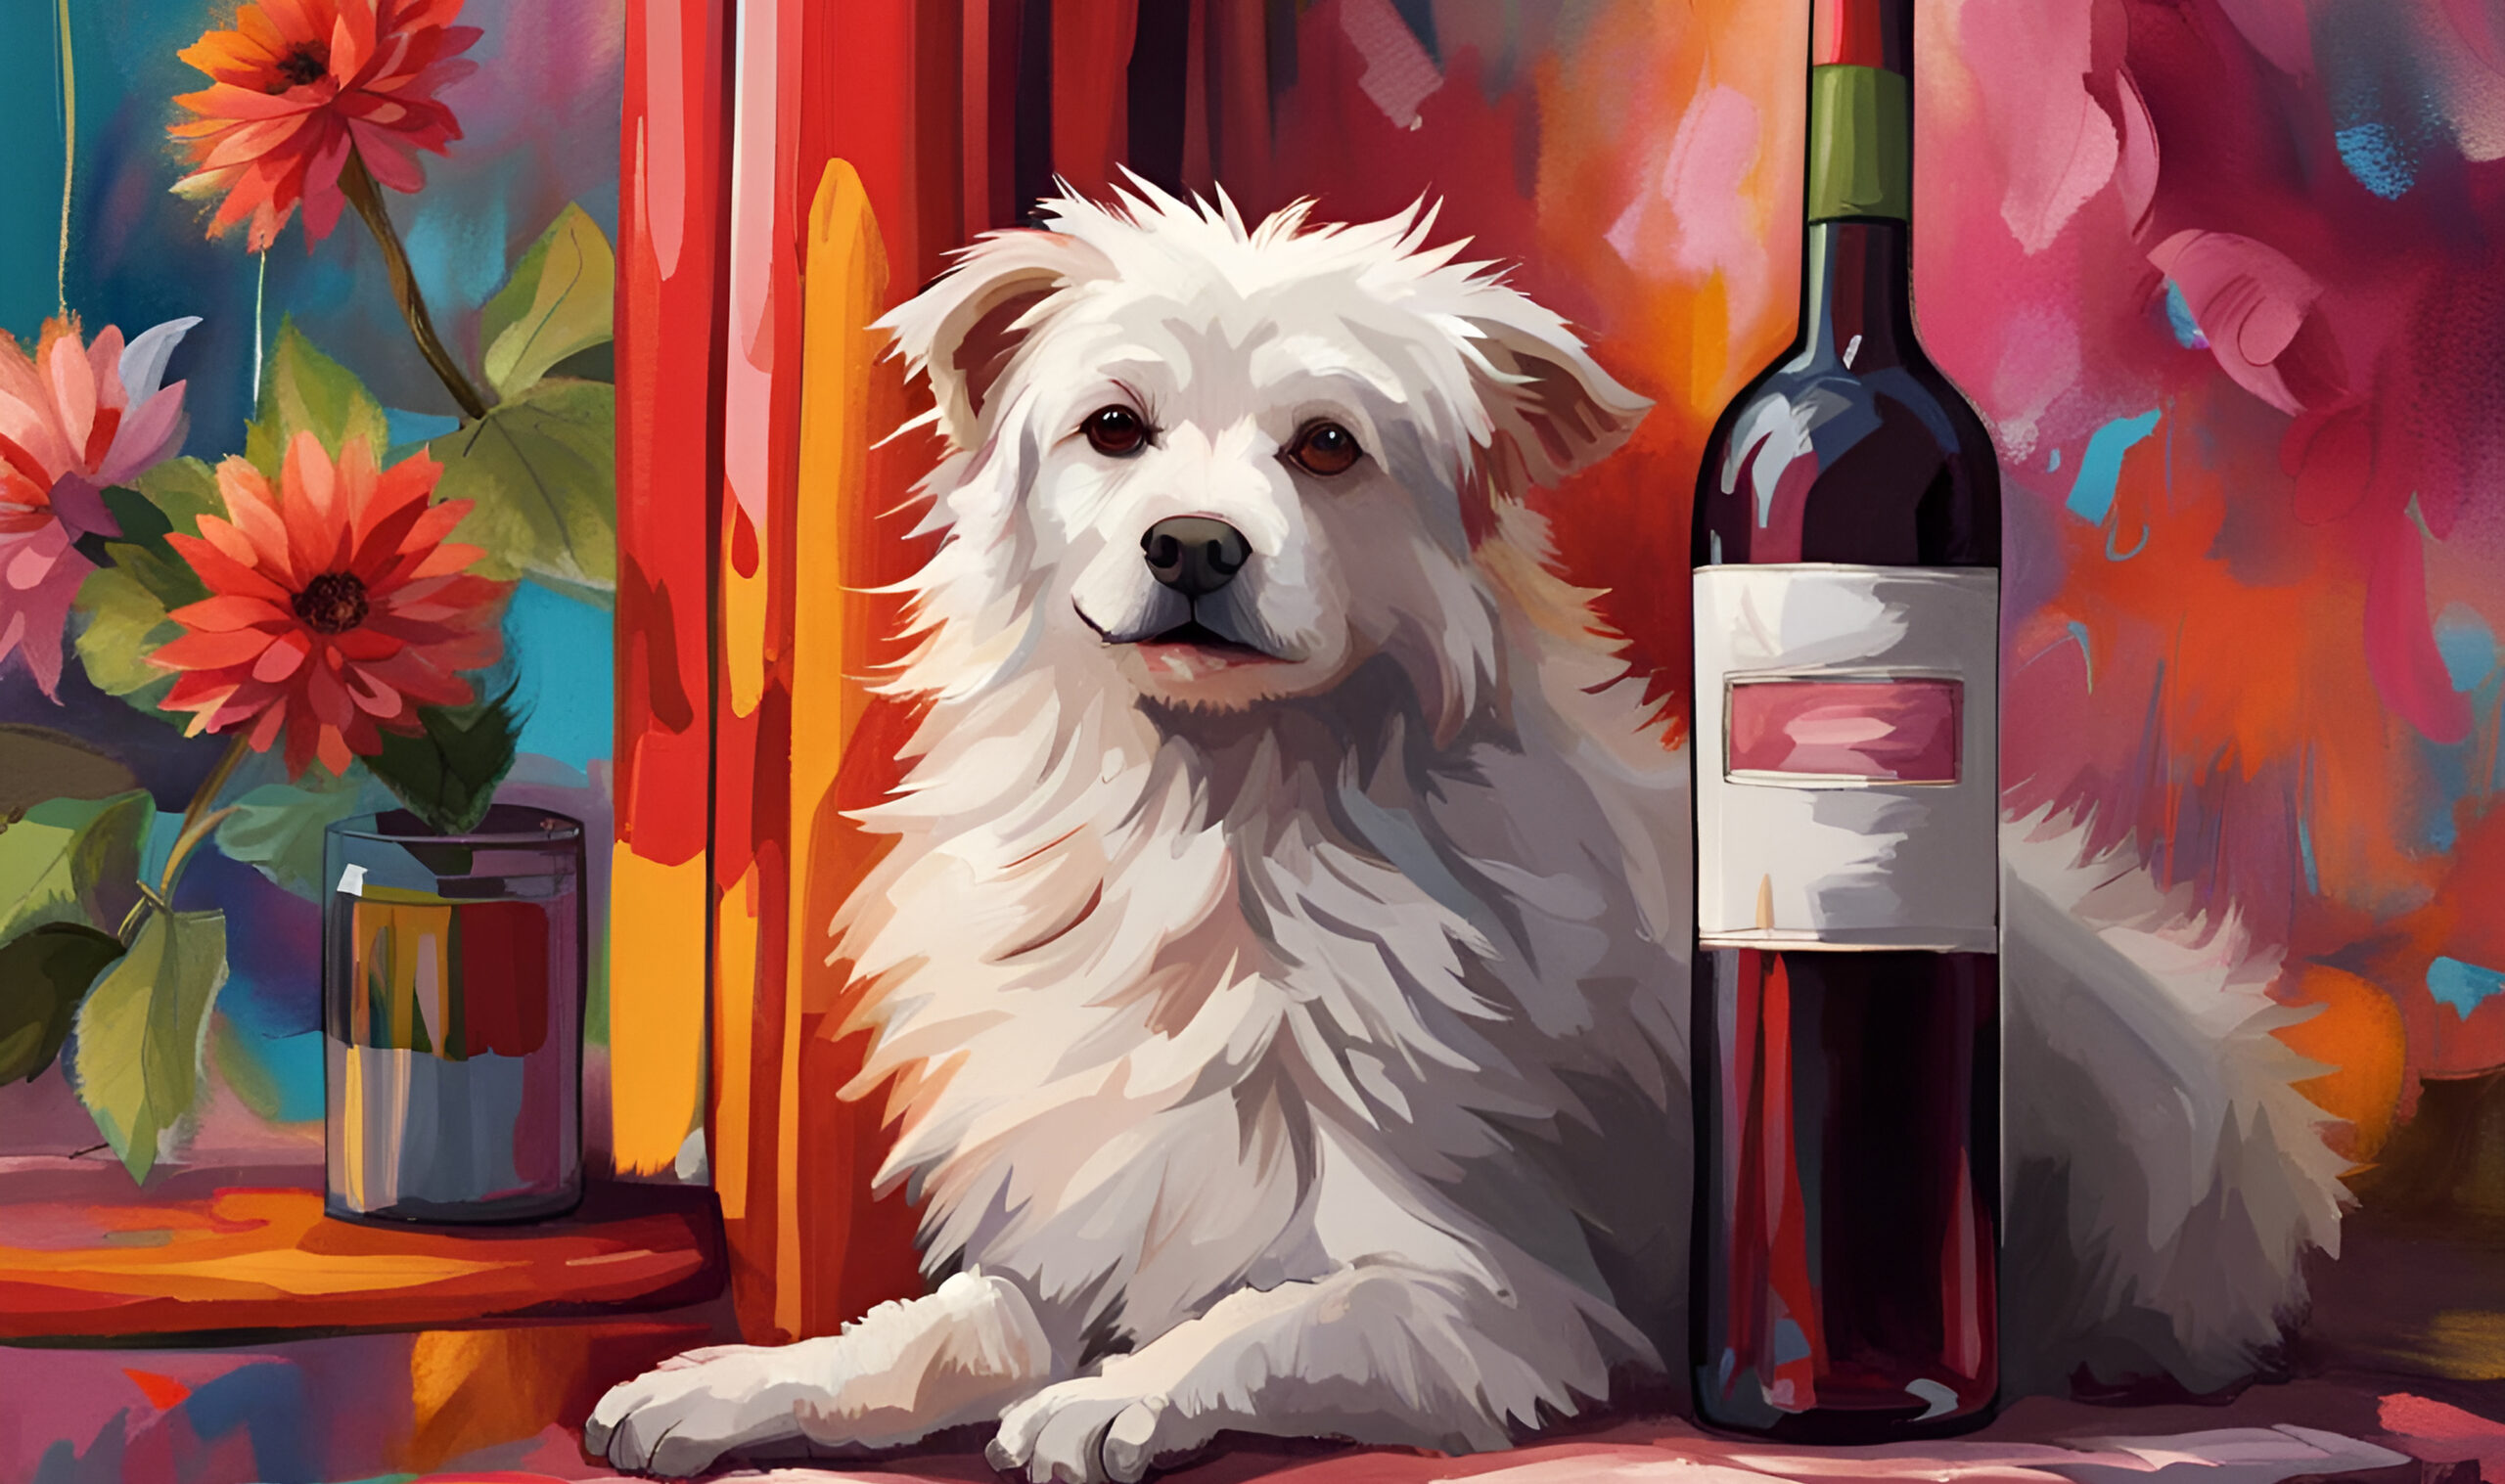 Episode #729 - Is Your Wine Still Giving You the Warm Fuzzies?